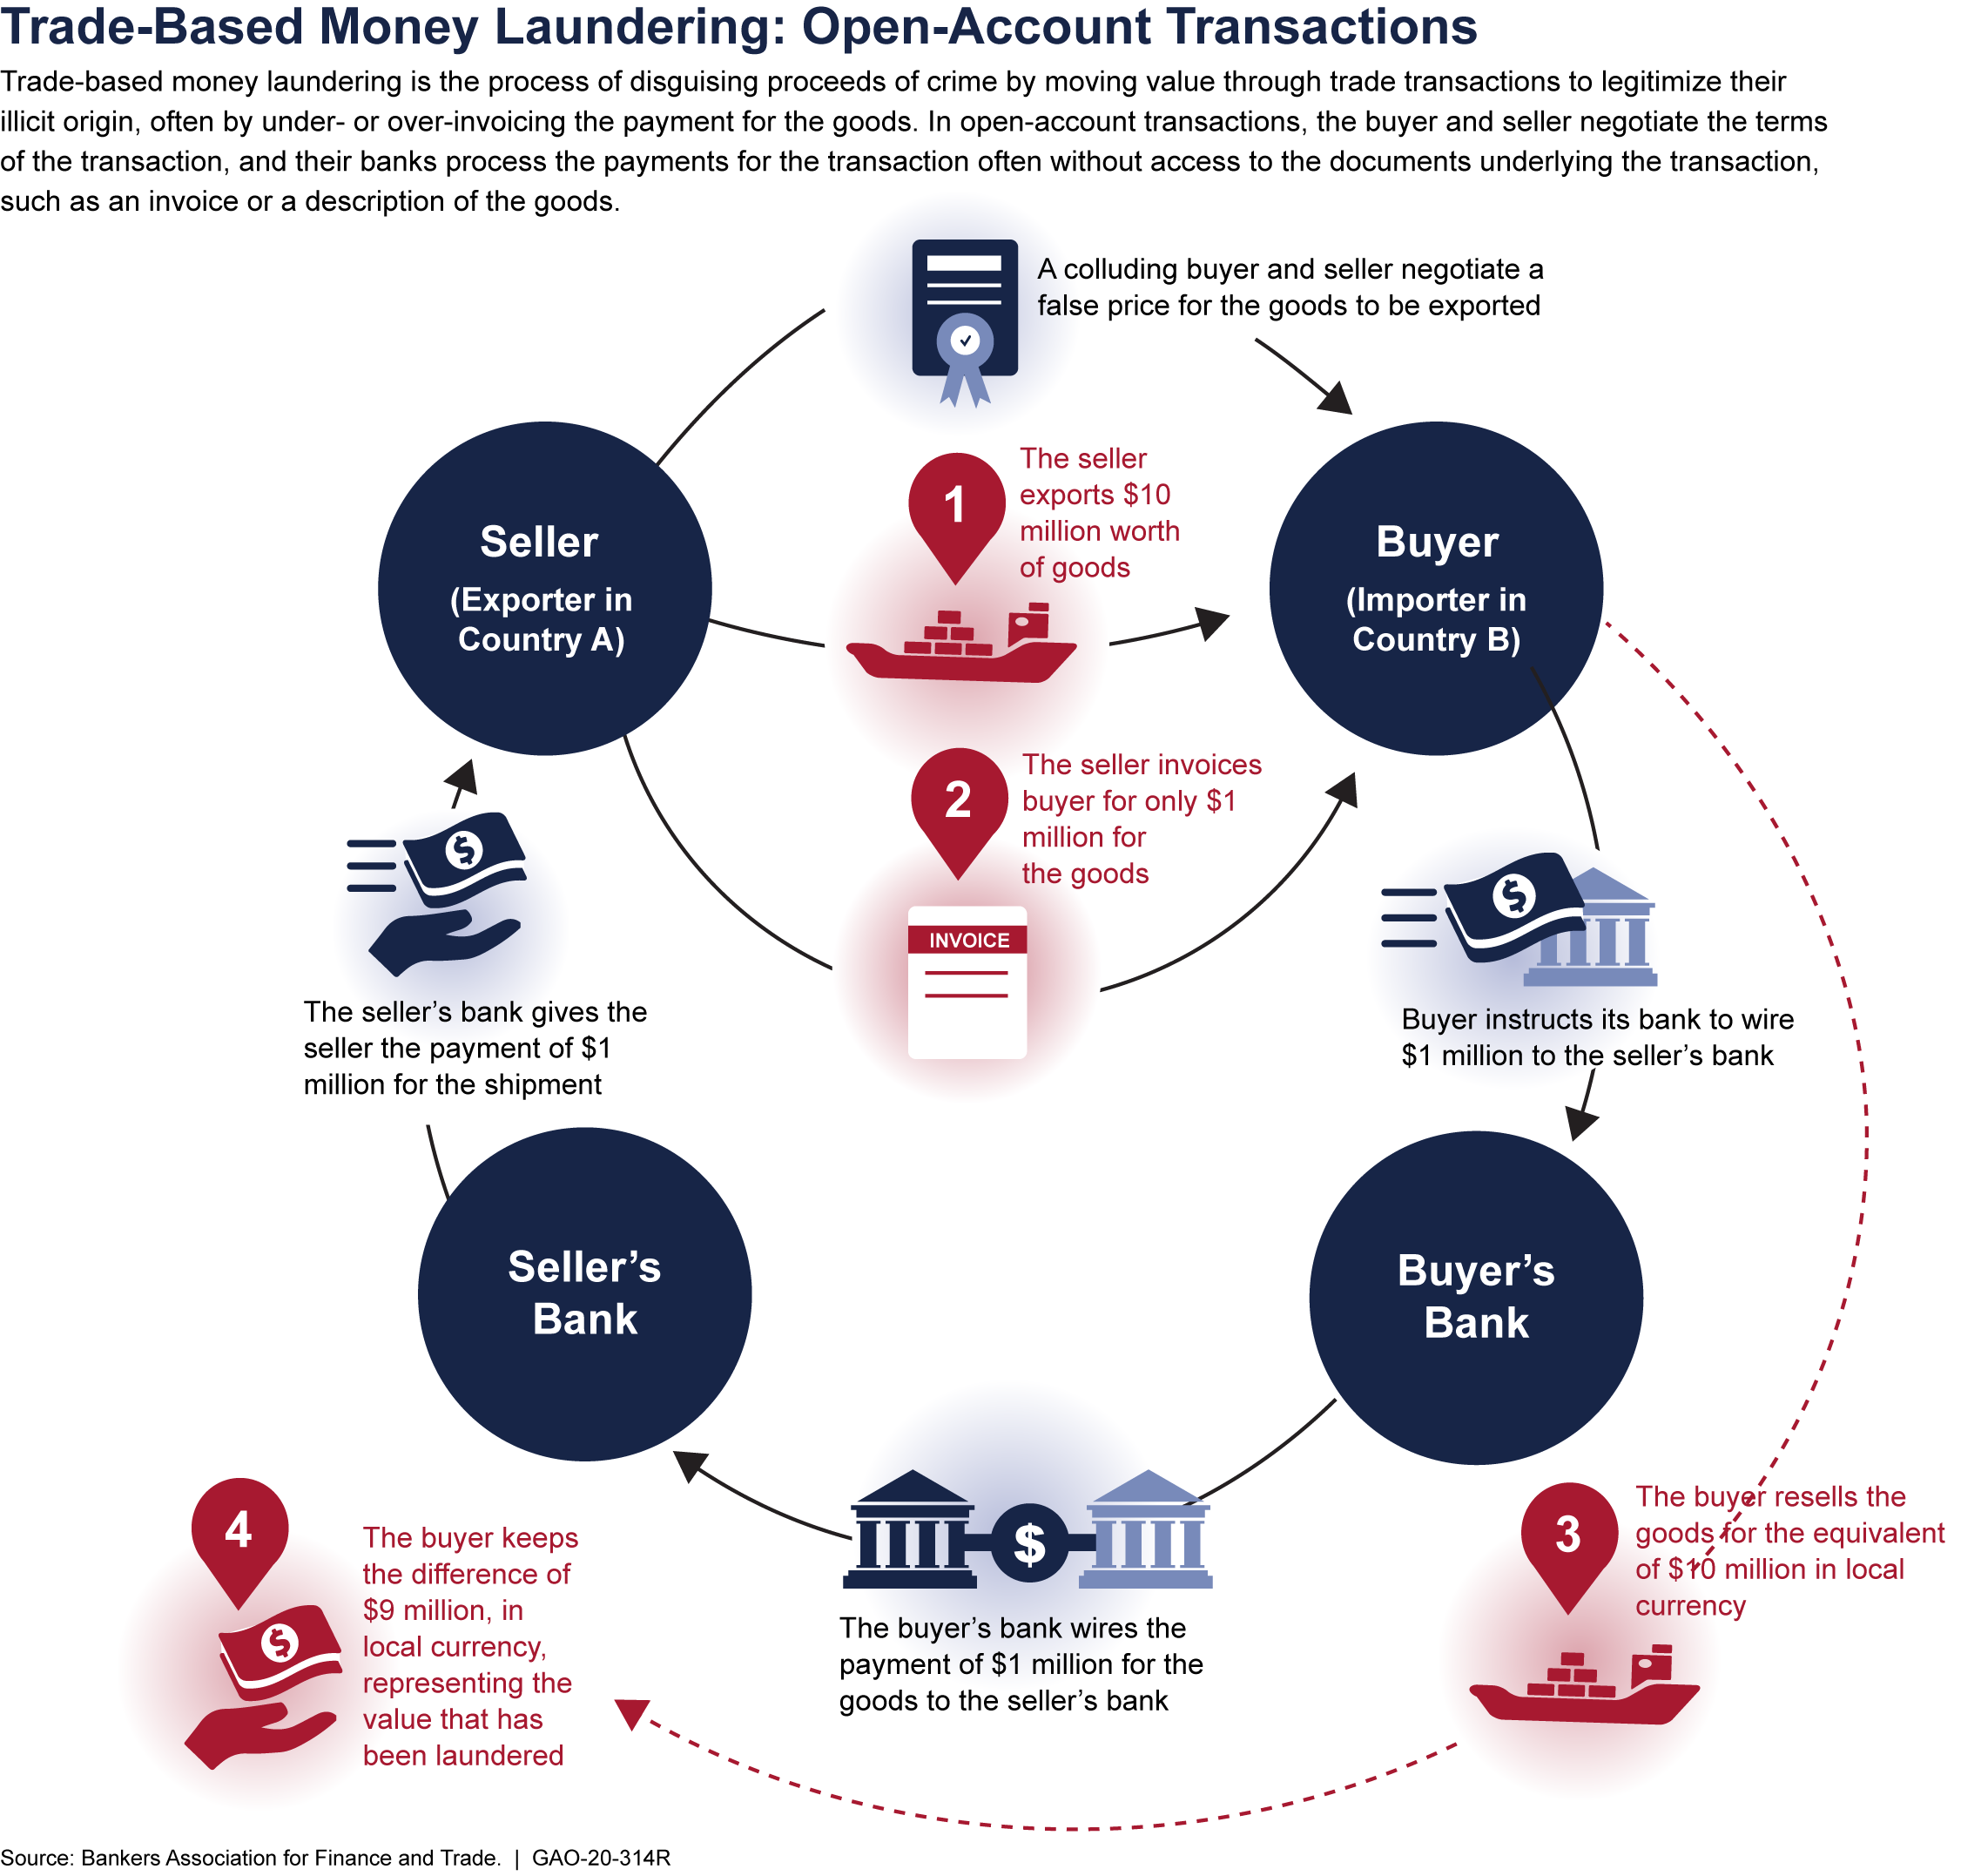 Trade-Based Money Laundering: Open-Account Transactions